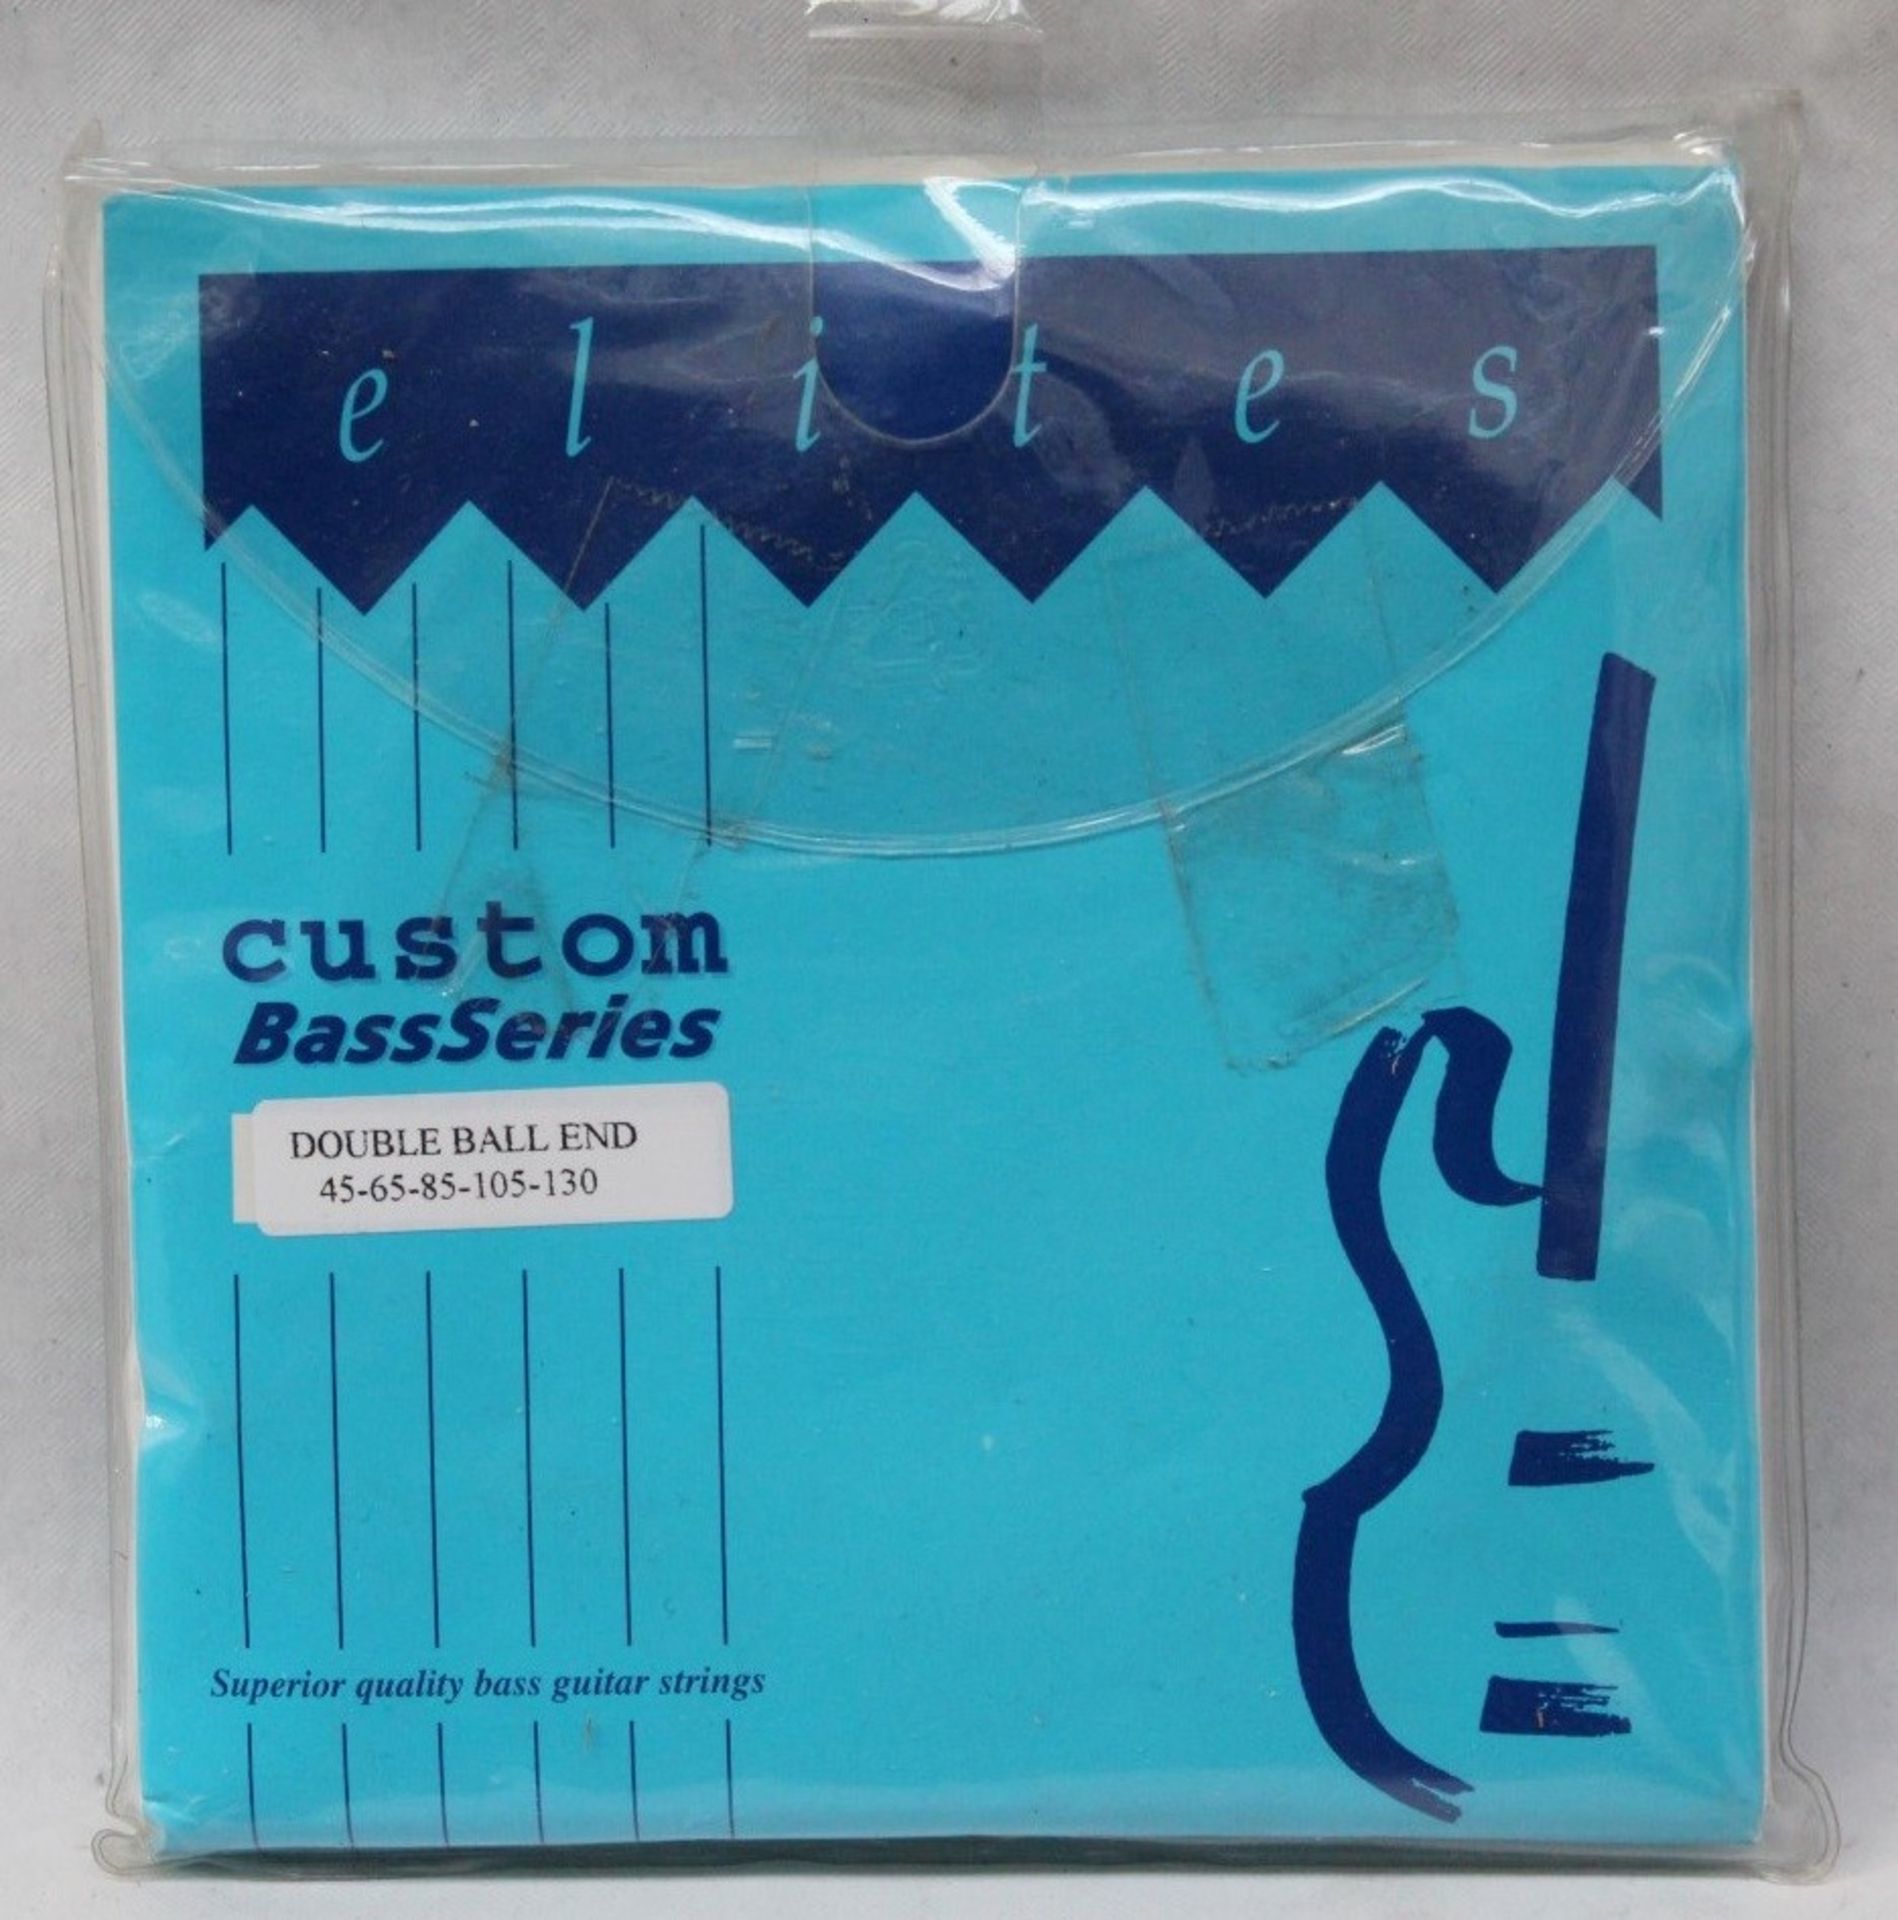 1 x Set of Elites 5 String Double Ball End Bass Strings - Brand New Stock - CL020 - Ref Pro213 -